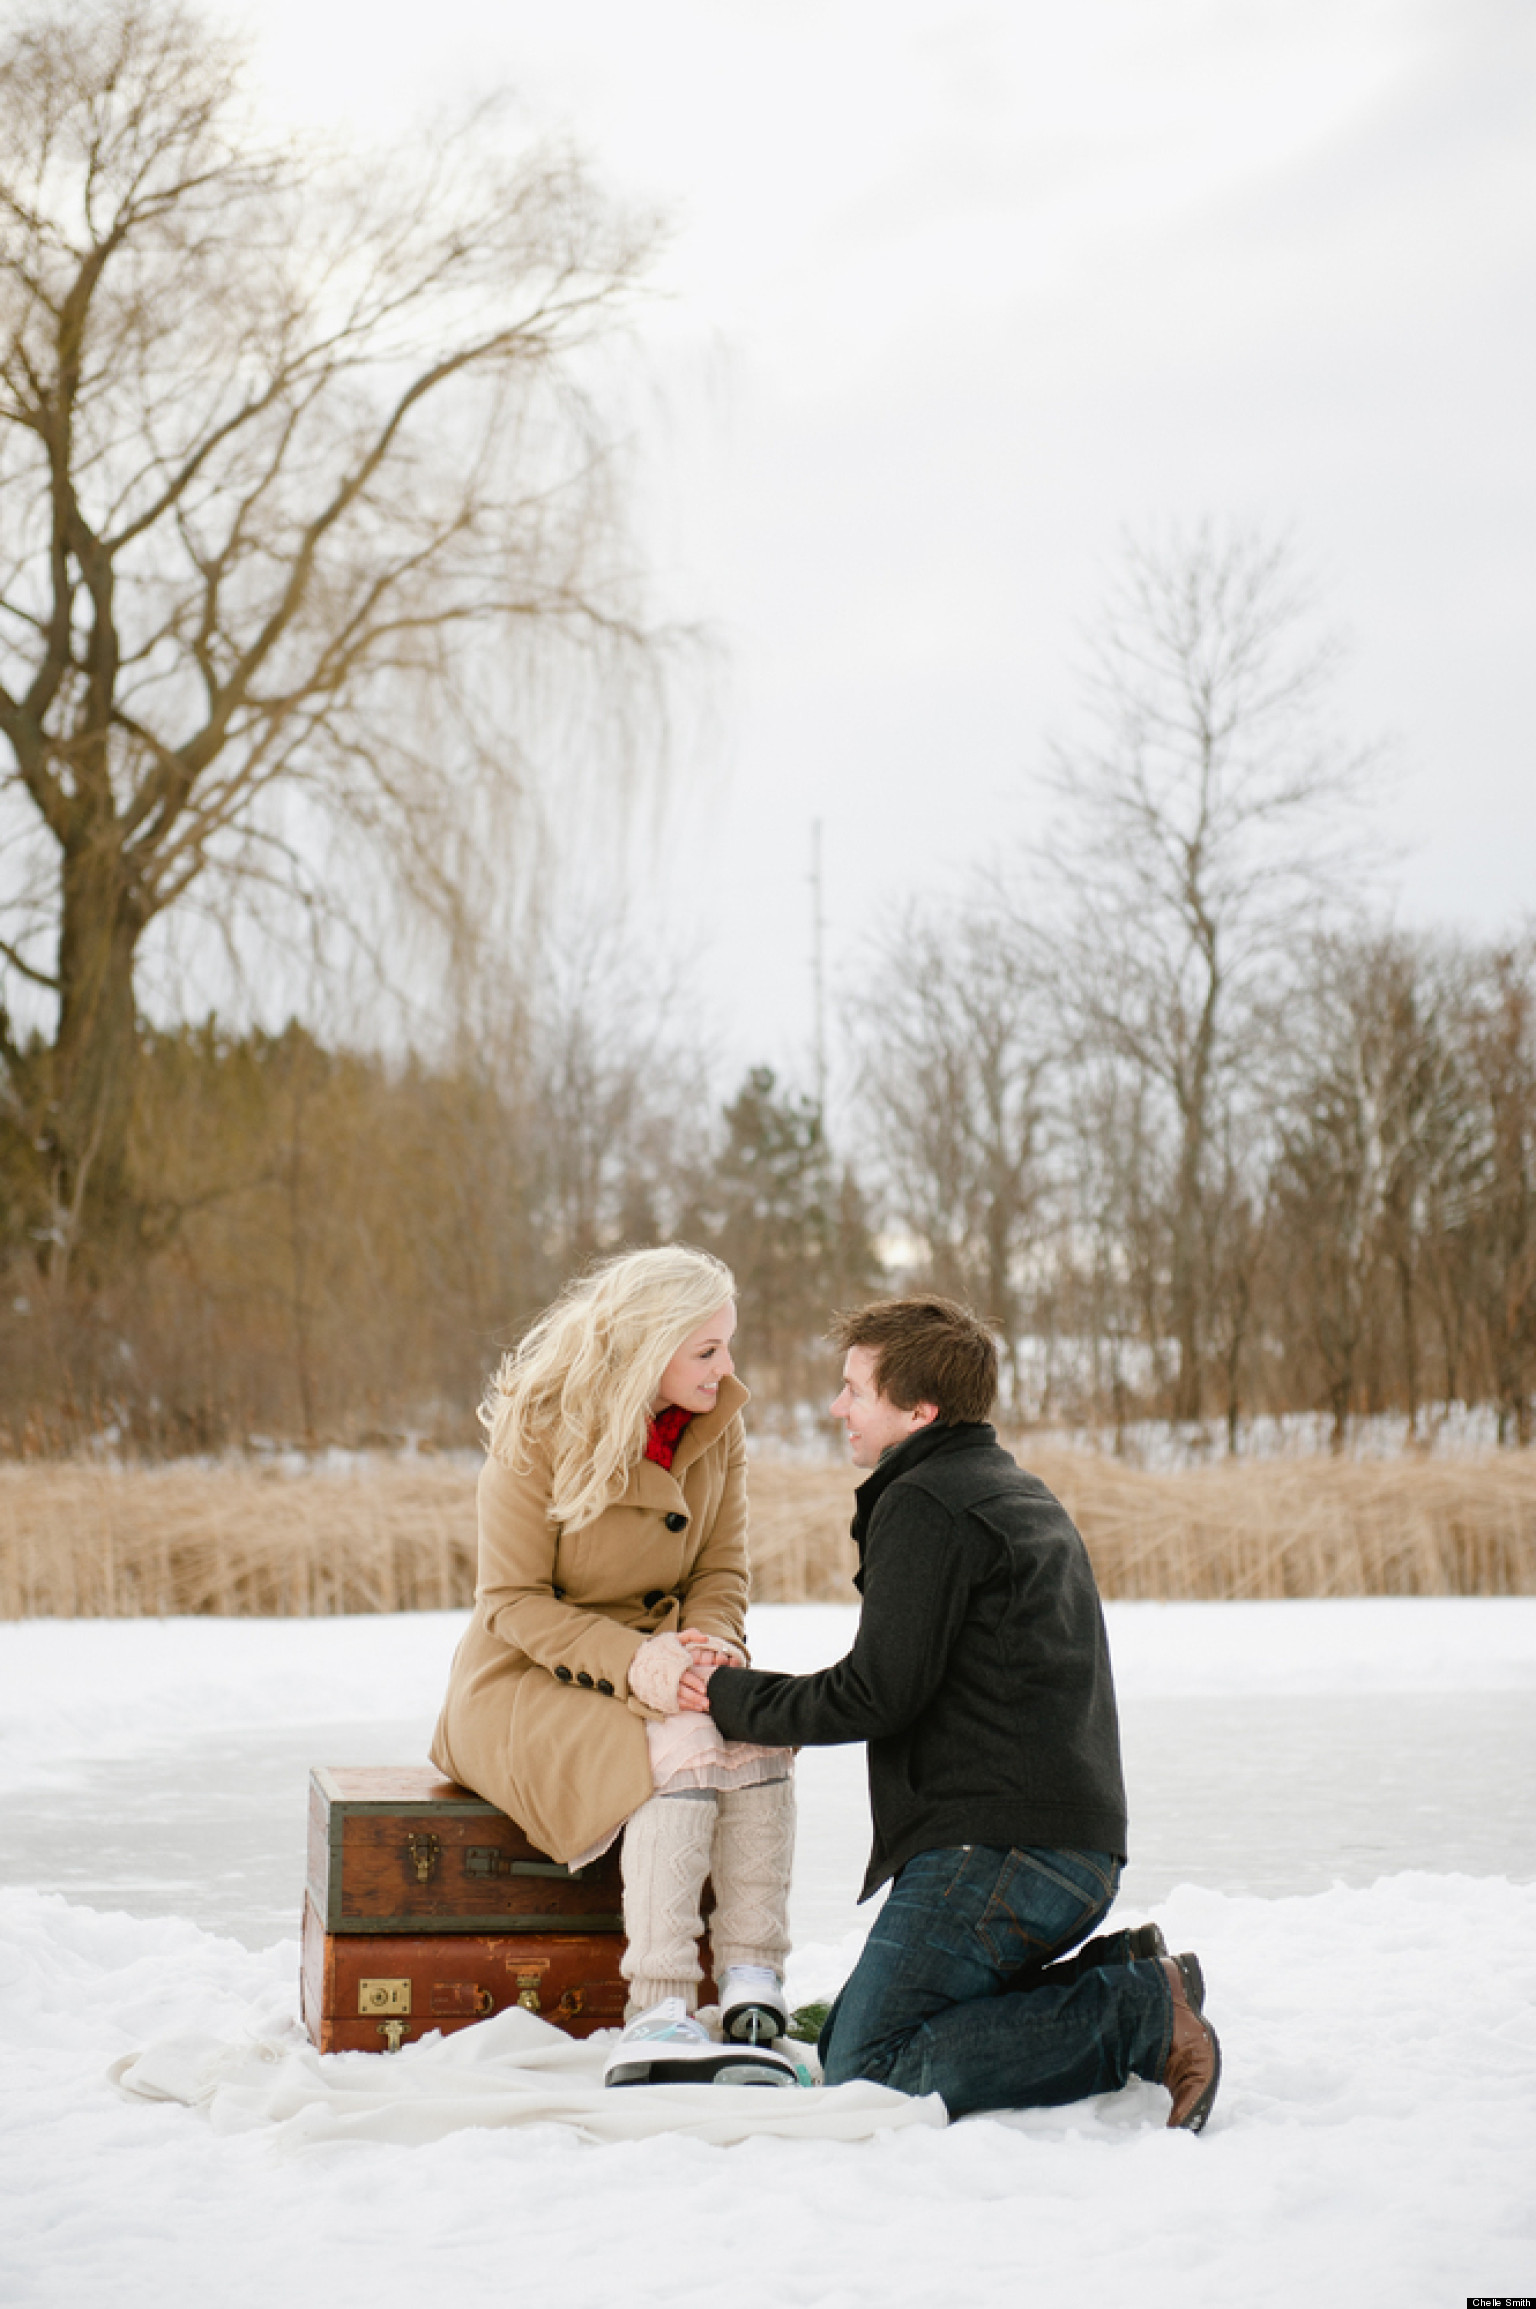 How To Propose: Experts Share Their Tips For Popping The Question